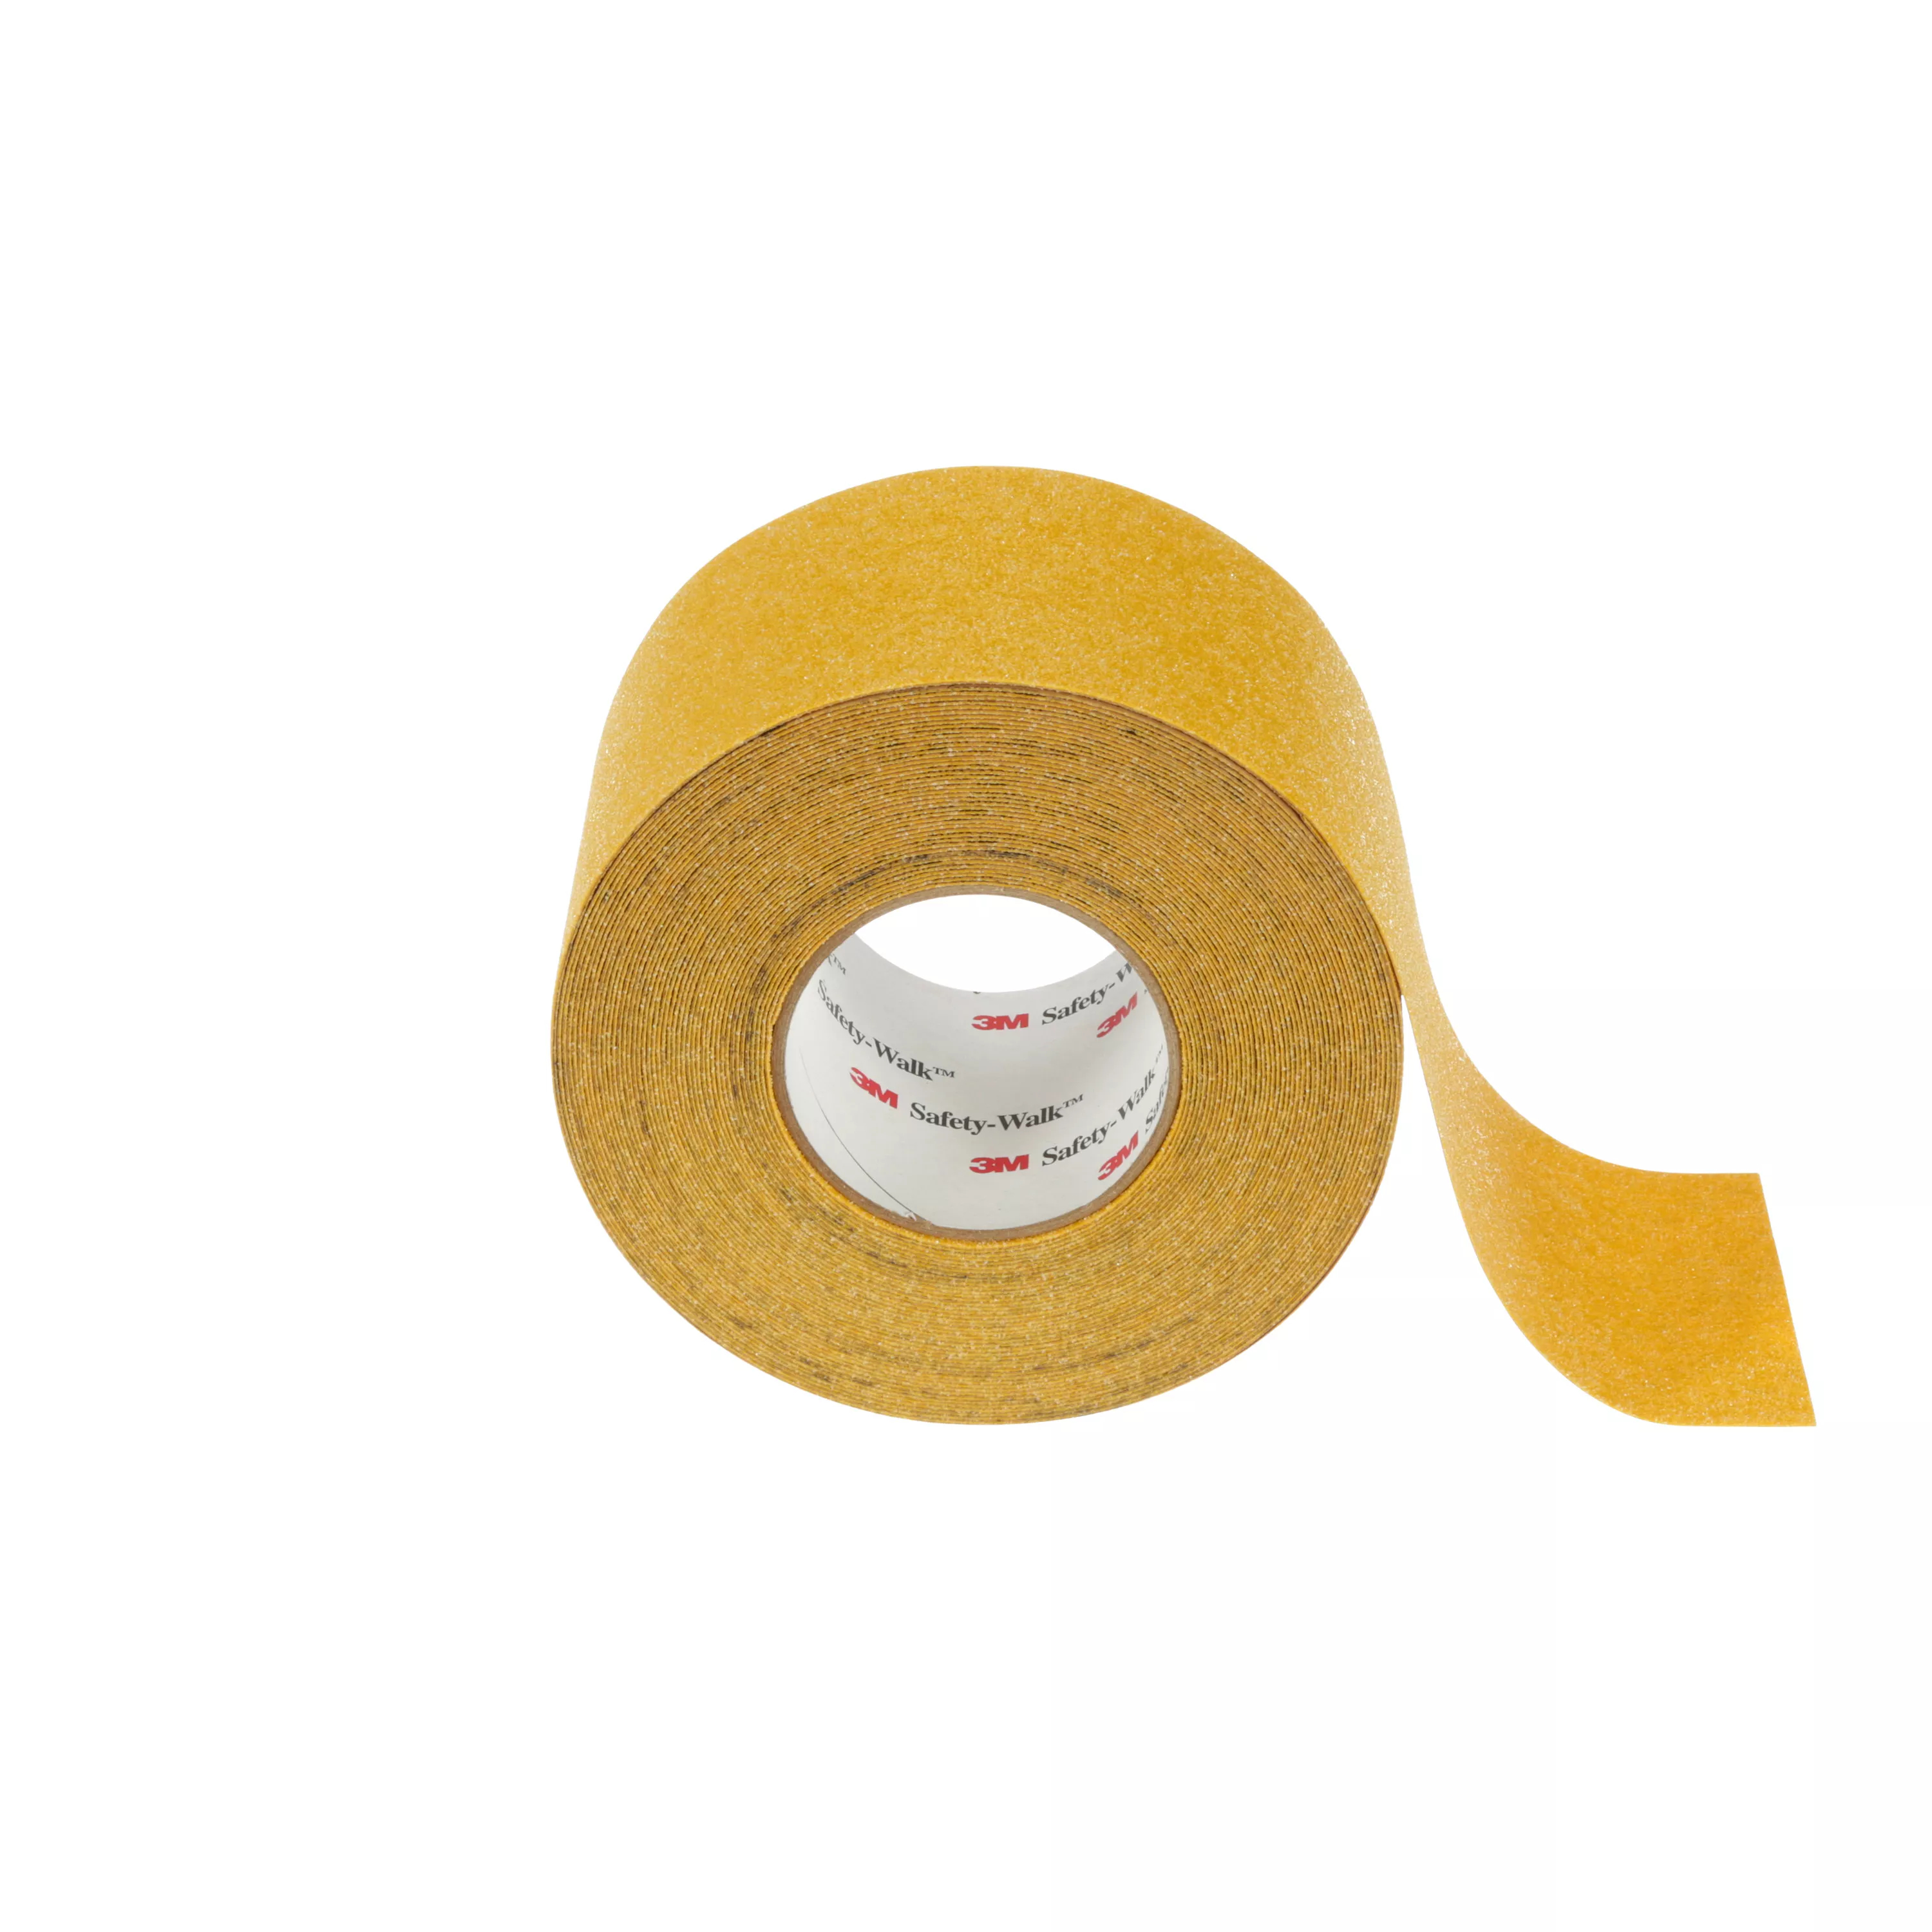 Product Number 630-B | 3M™ Safety-Walk™ Slip-Resistant General Purpose Tapes & Treads 630-B